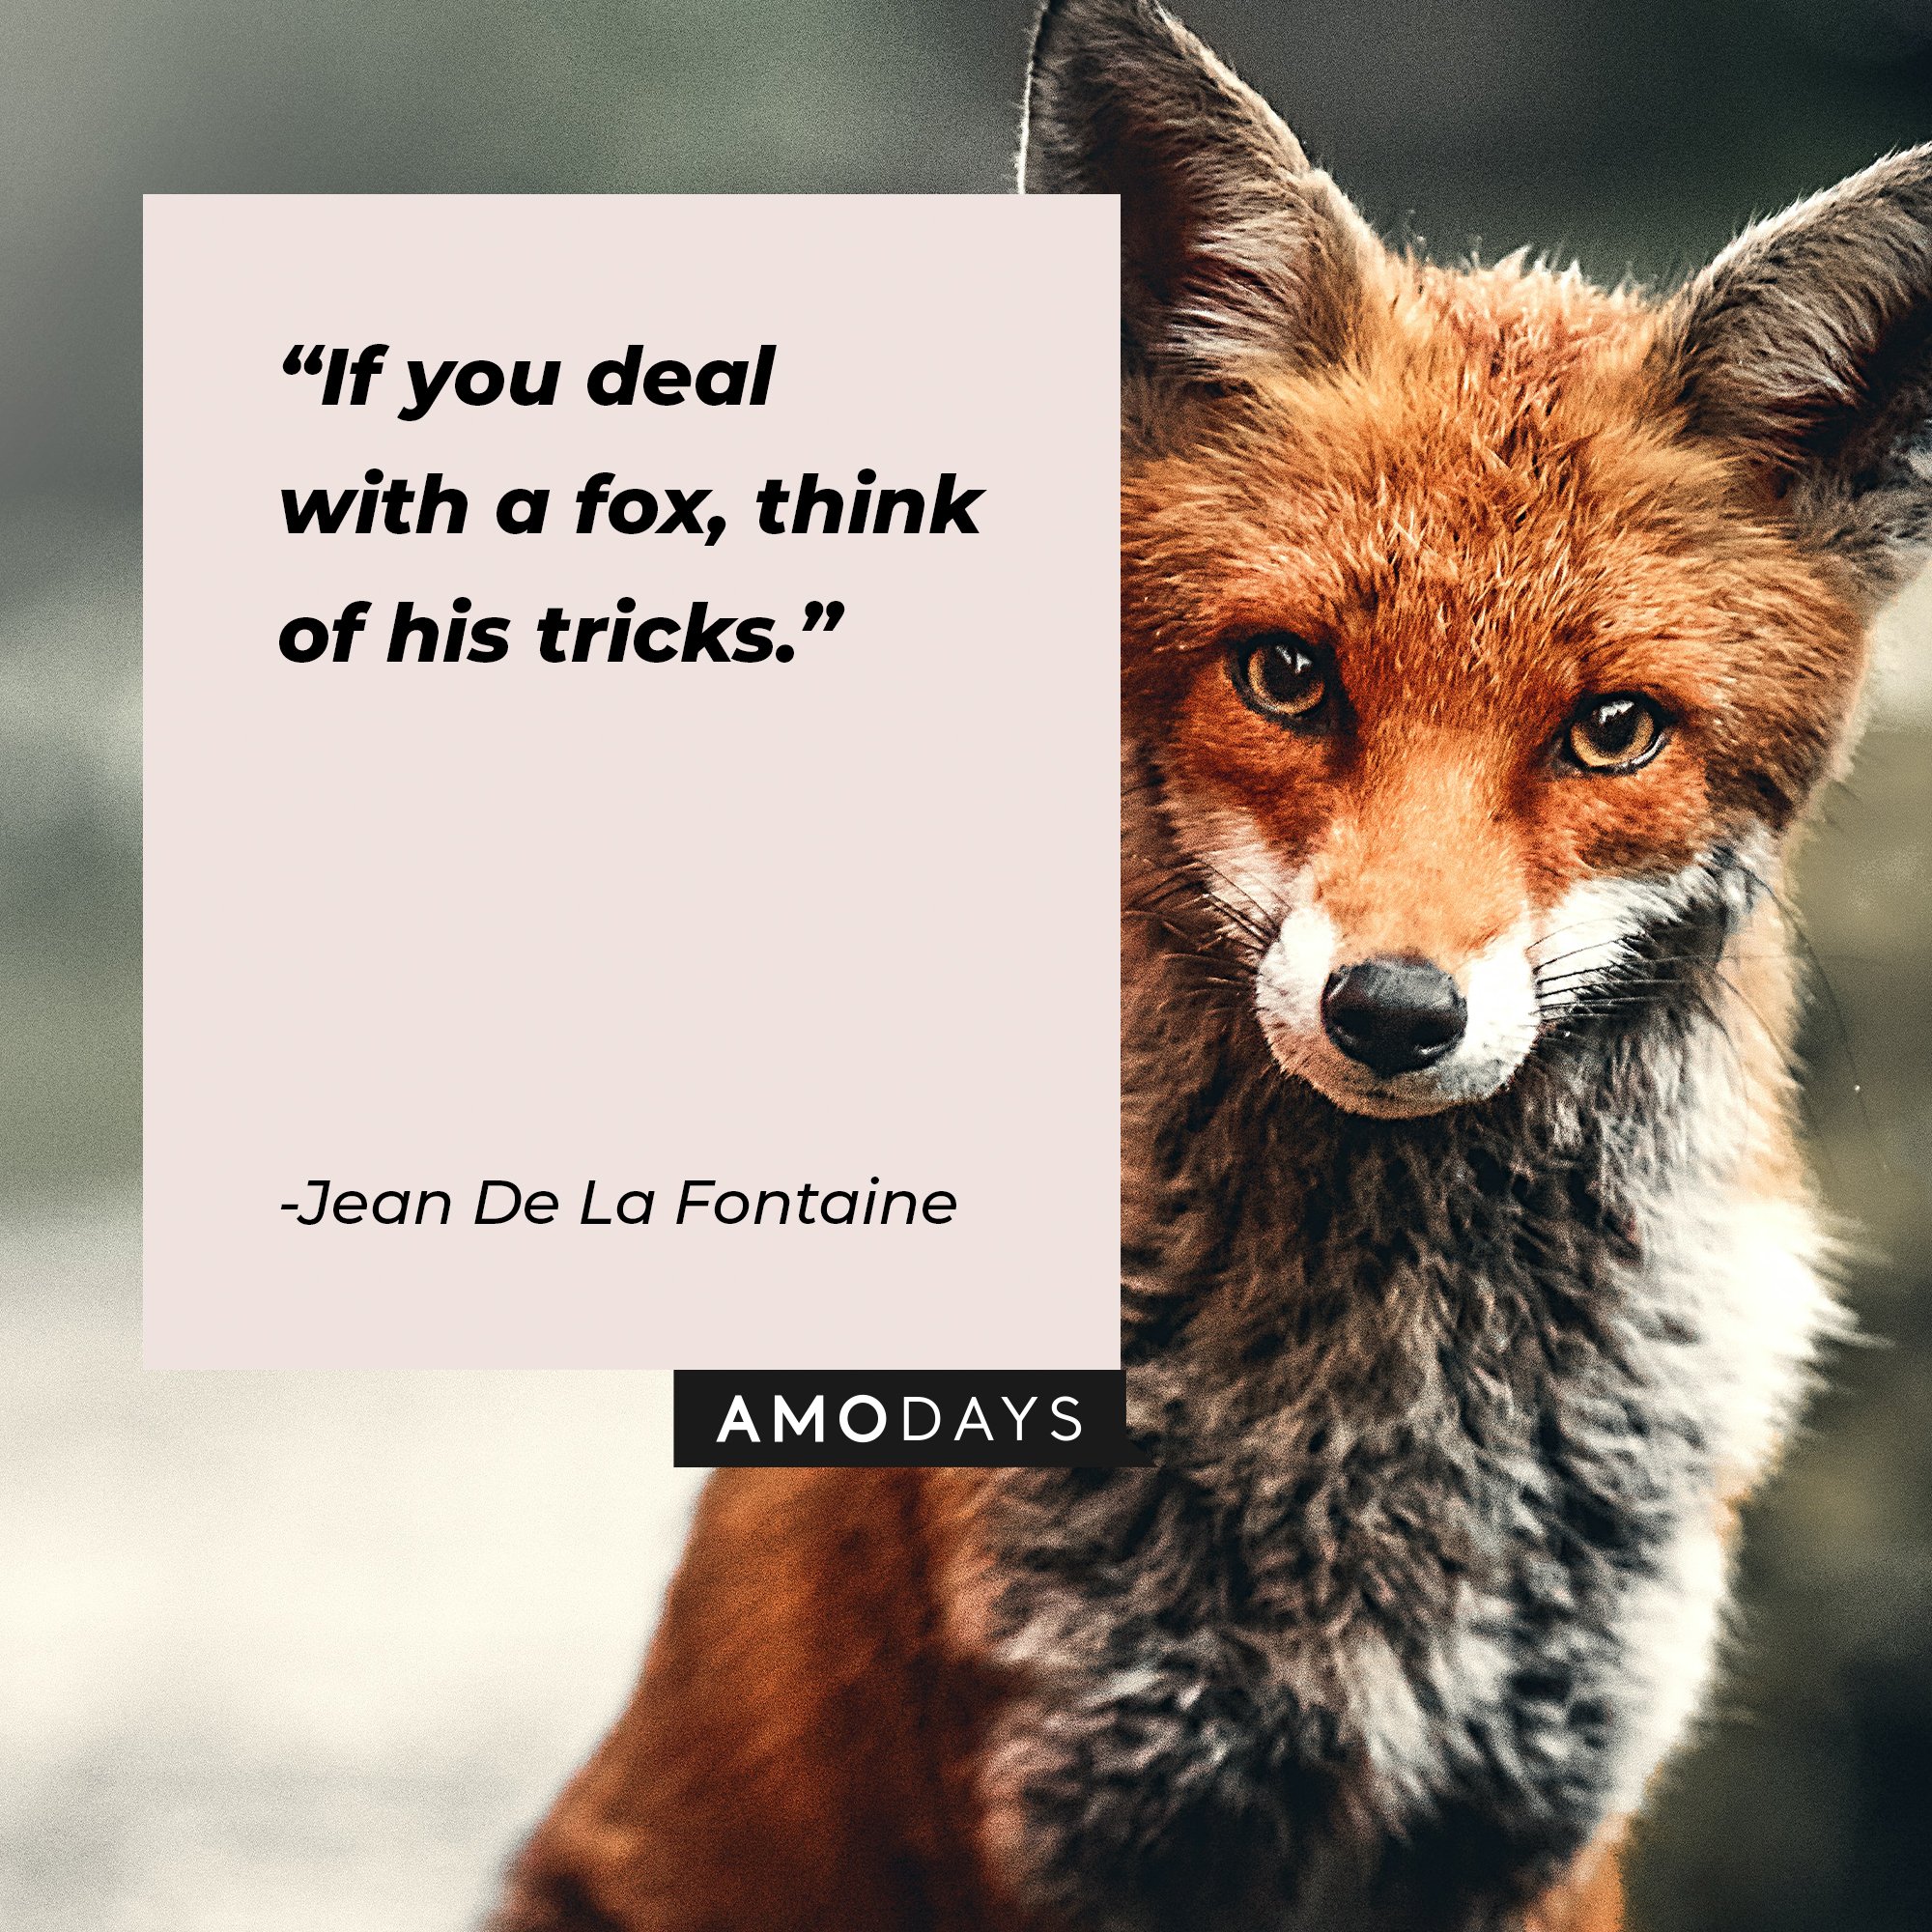 Jean De La Fontaine’s quote: "If you deal with a fox, think of his tricks."   | Image: AmoDays